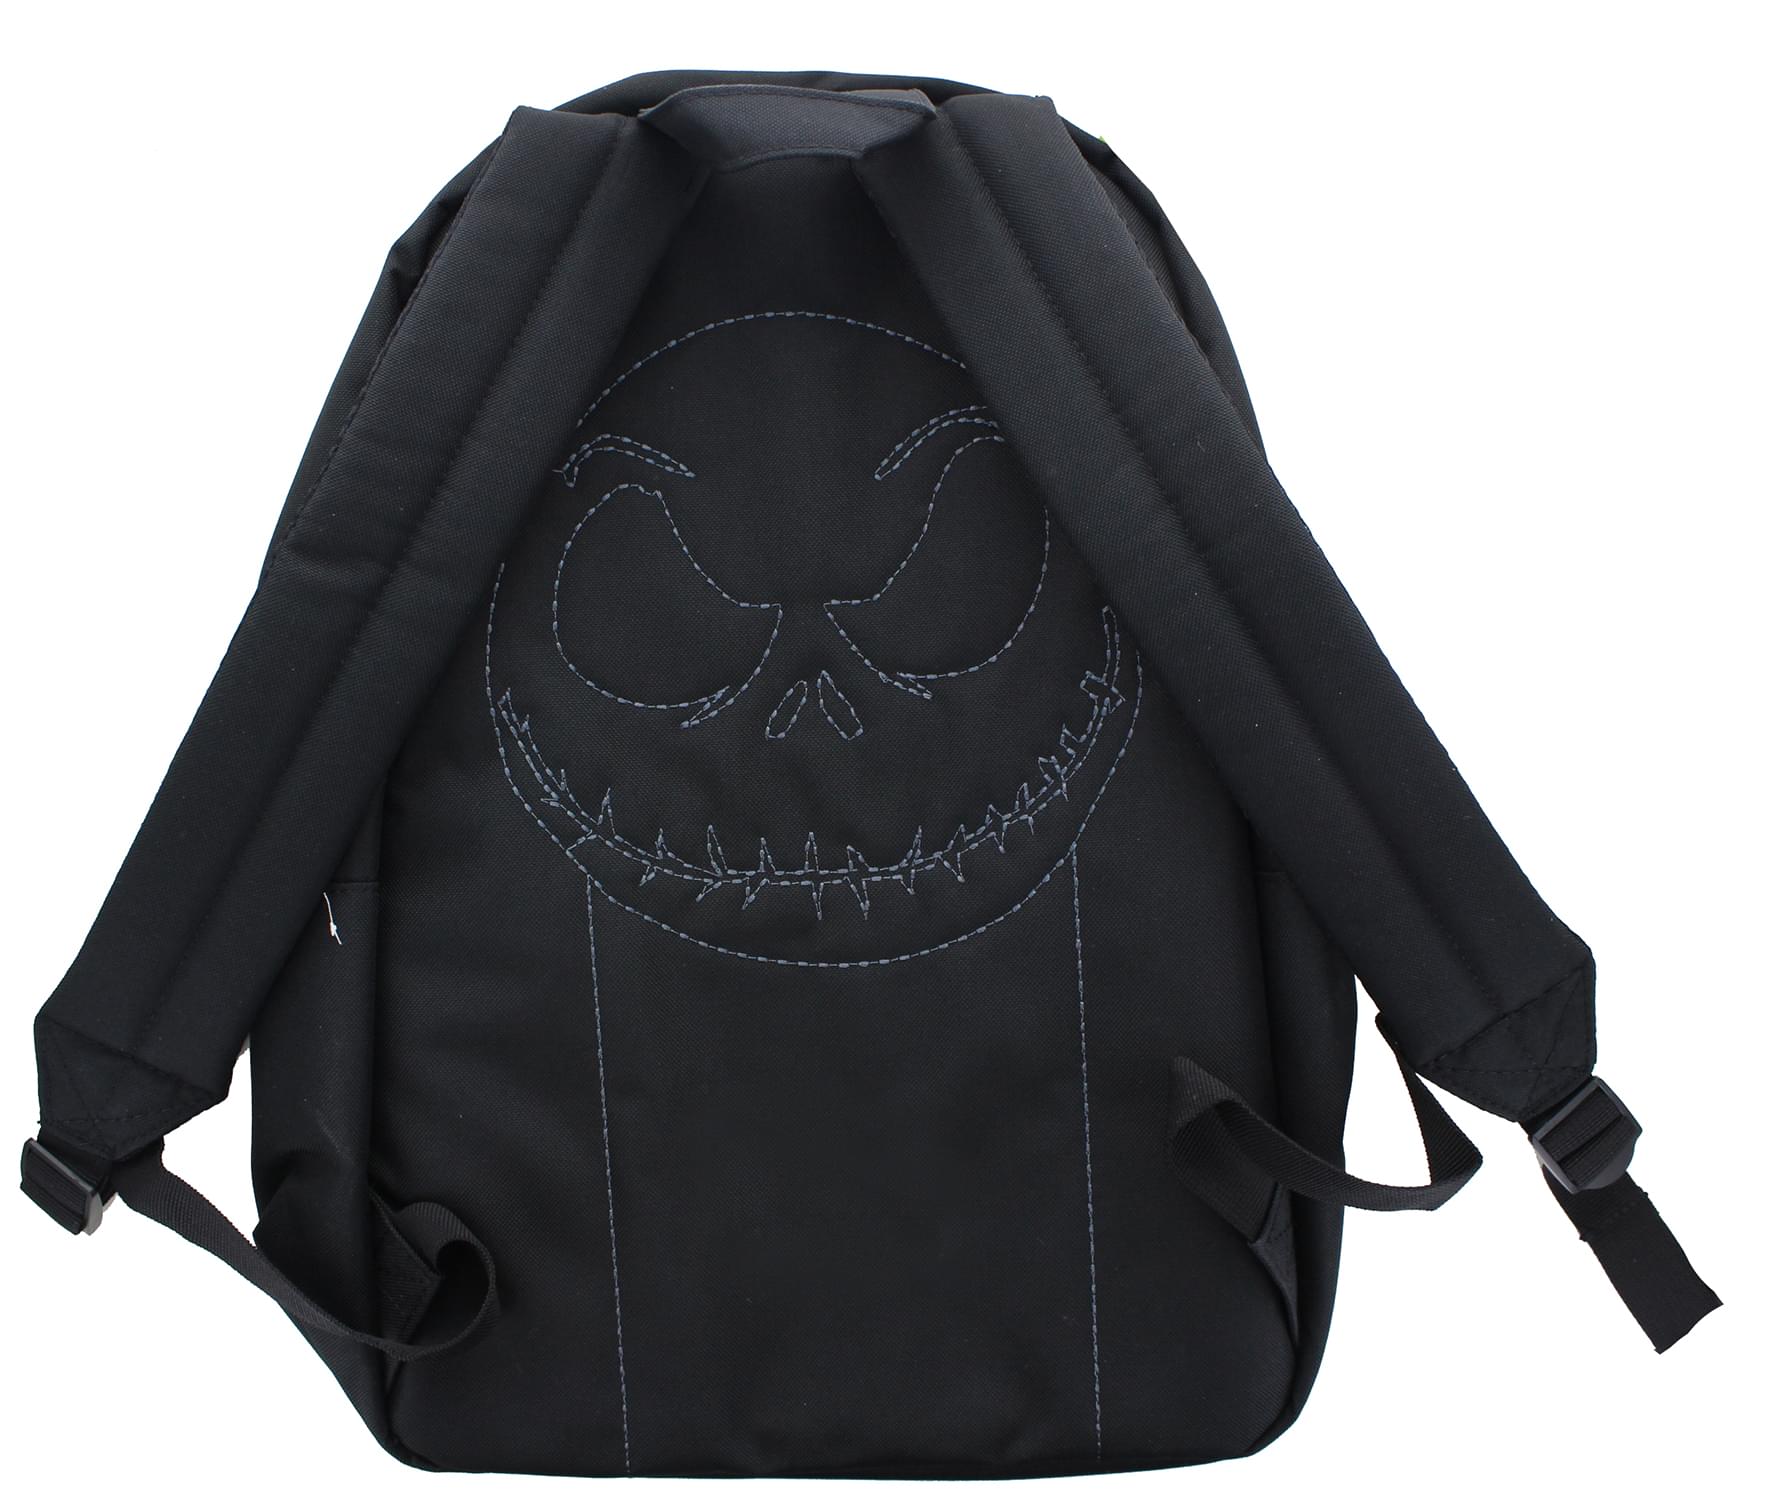 The Nightmare Before Christmas Exclusive Loungefly 17 Inch Nylon Backpack